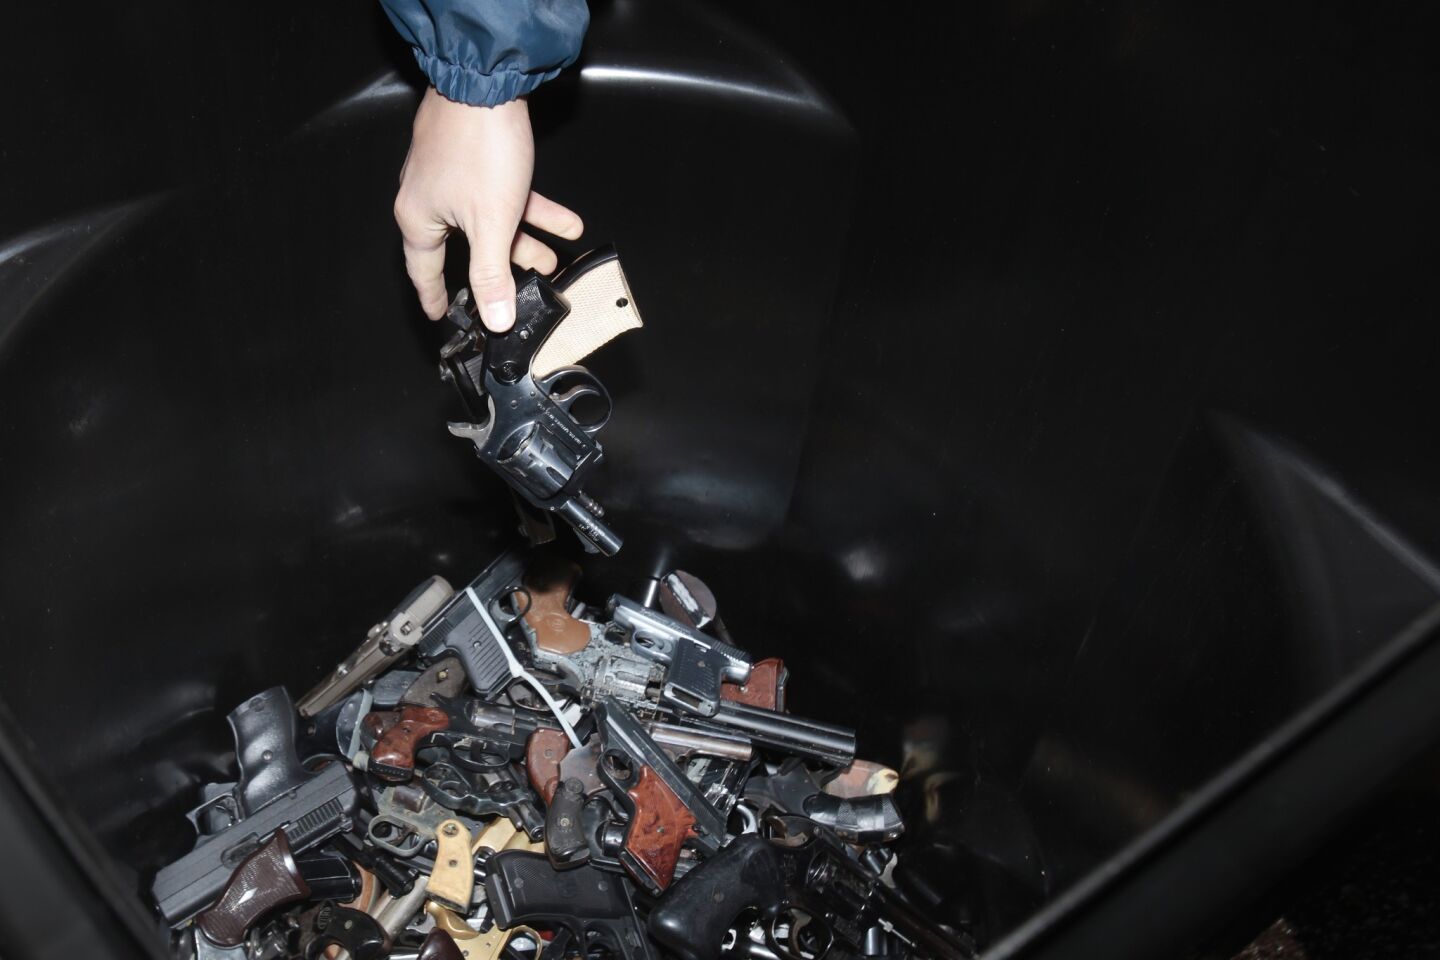 A bin filled with pistols at the buyback.